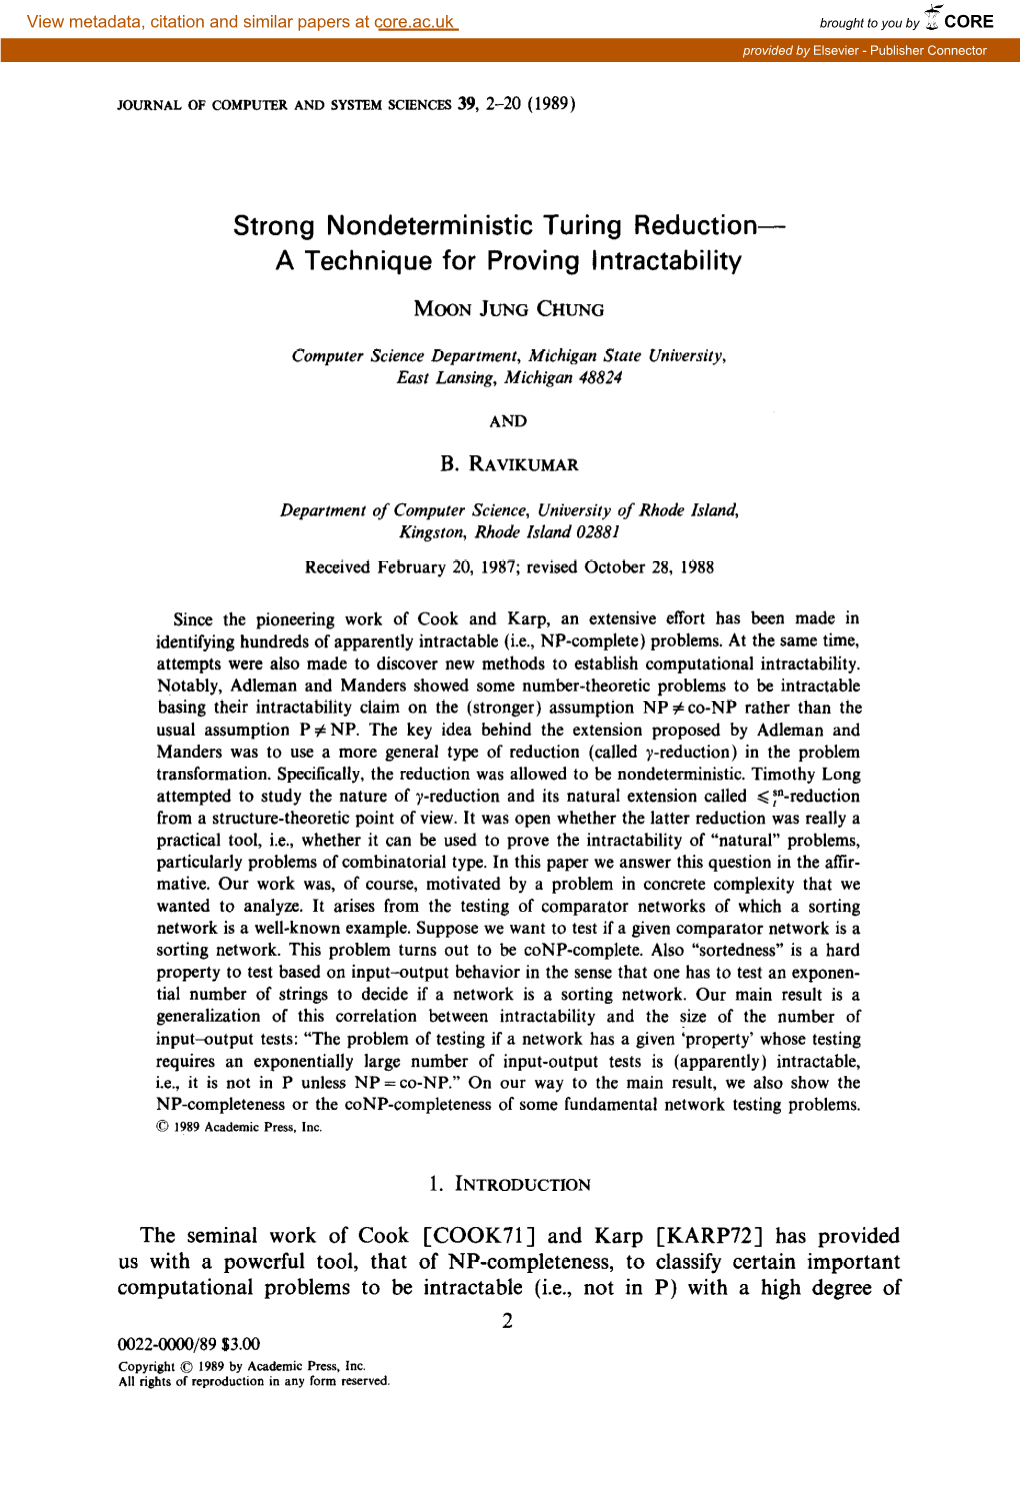 Strong Nondeterministic Turing Reduction- a Technique for Proving Intractability